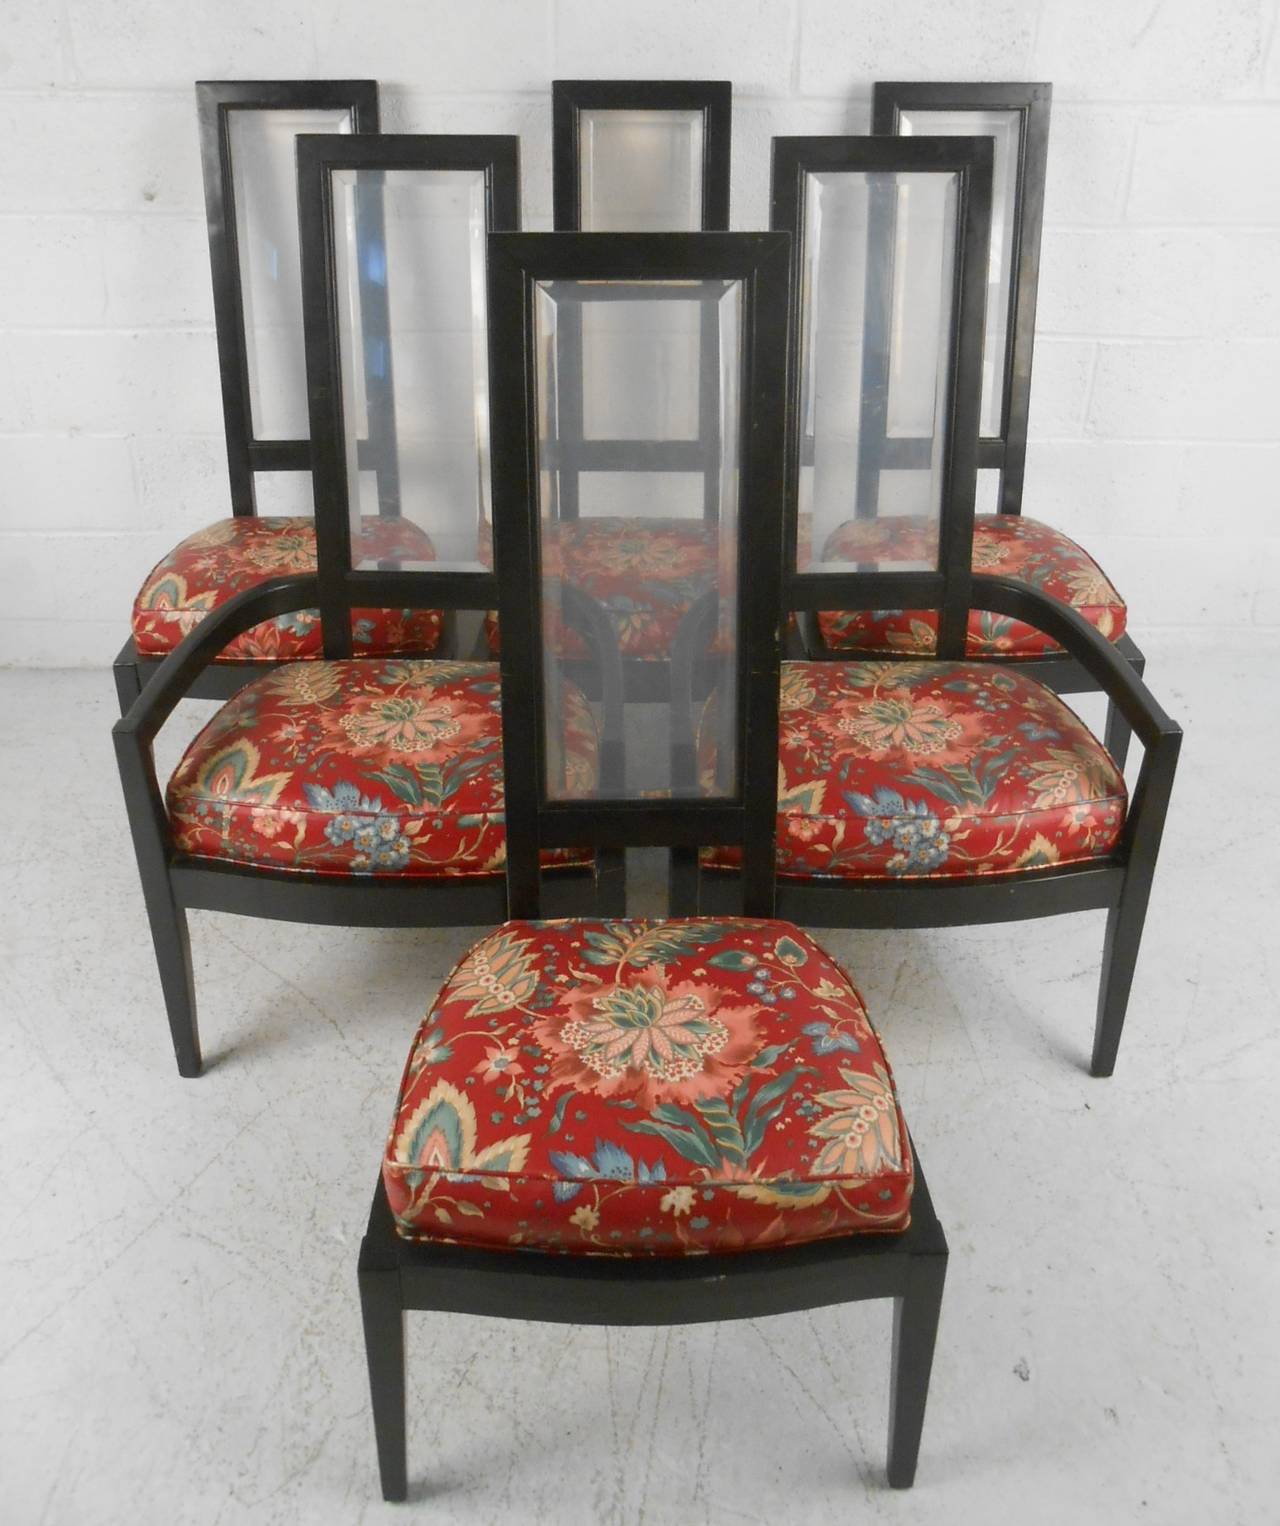 Unique set of high back dining chairs from the Brickfield Furniture Company, High Point N.C., 1972. Black lacquer wood frames with bevelled Lucite backs and period upholstery. Please confirm item location (NY or NJ) with dealer.